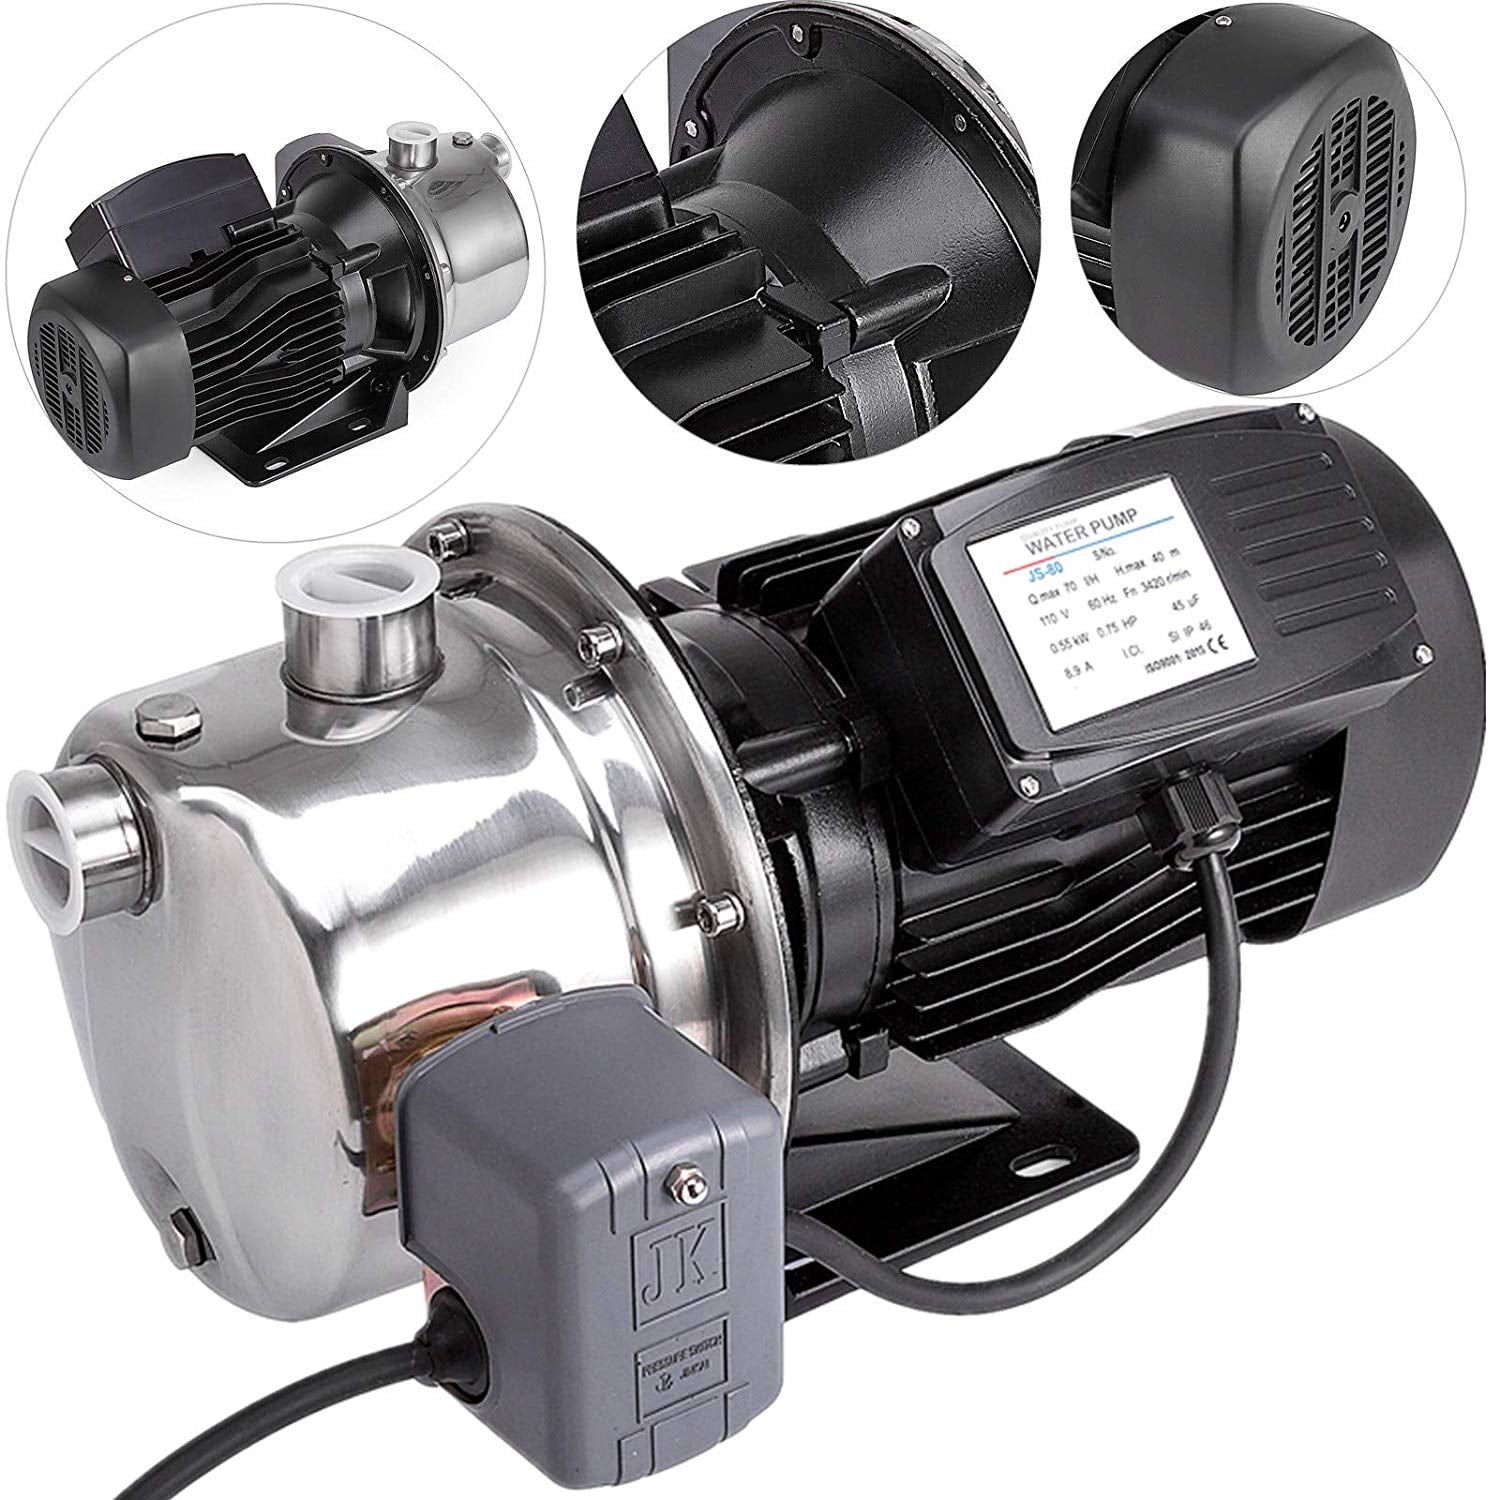 1 HP Shallow Well Jet Pump W/ Pressure Switch Water Pump 3420 RPM Commercial 